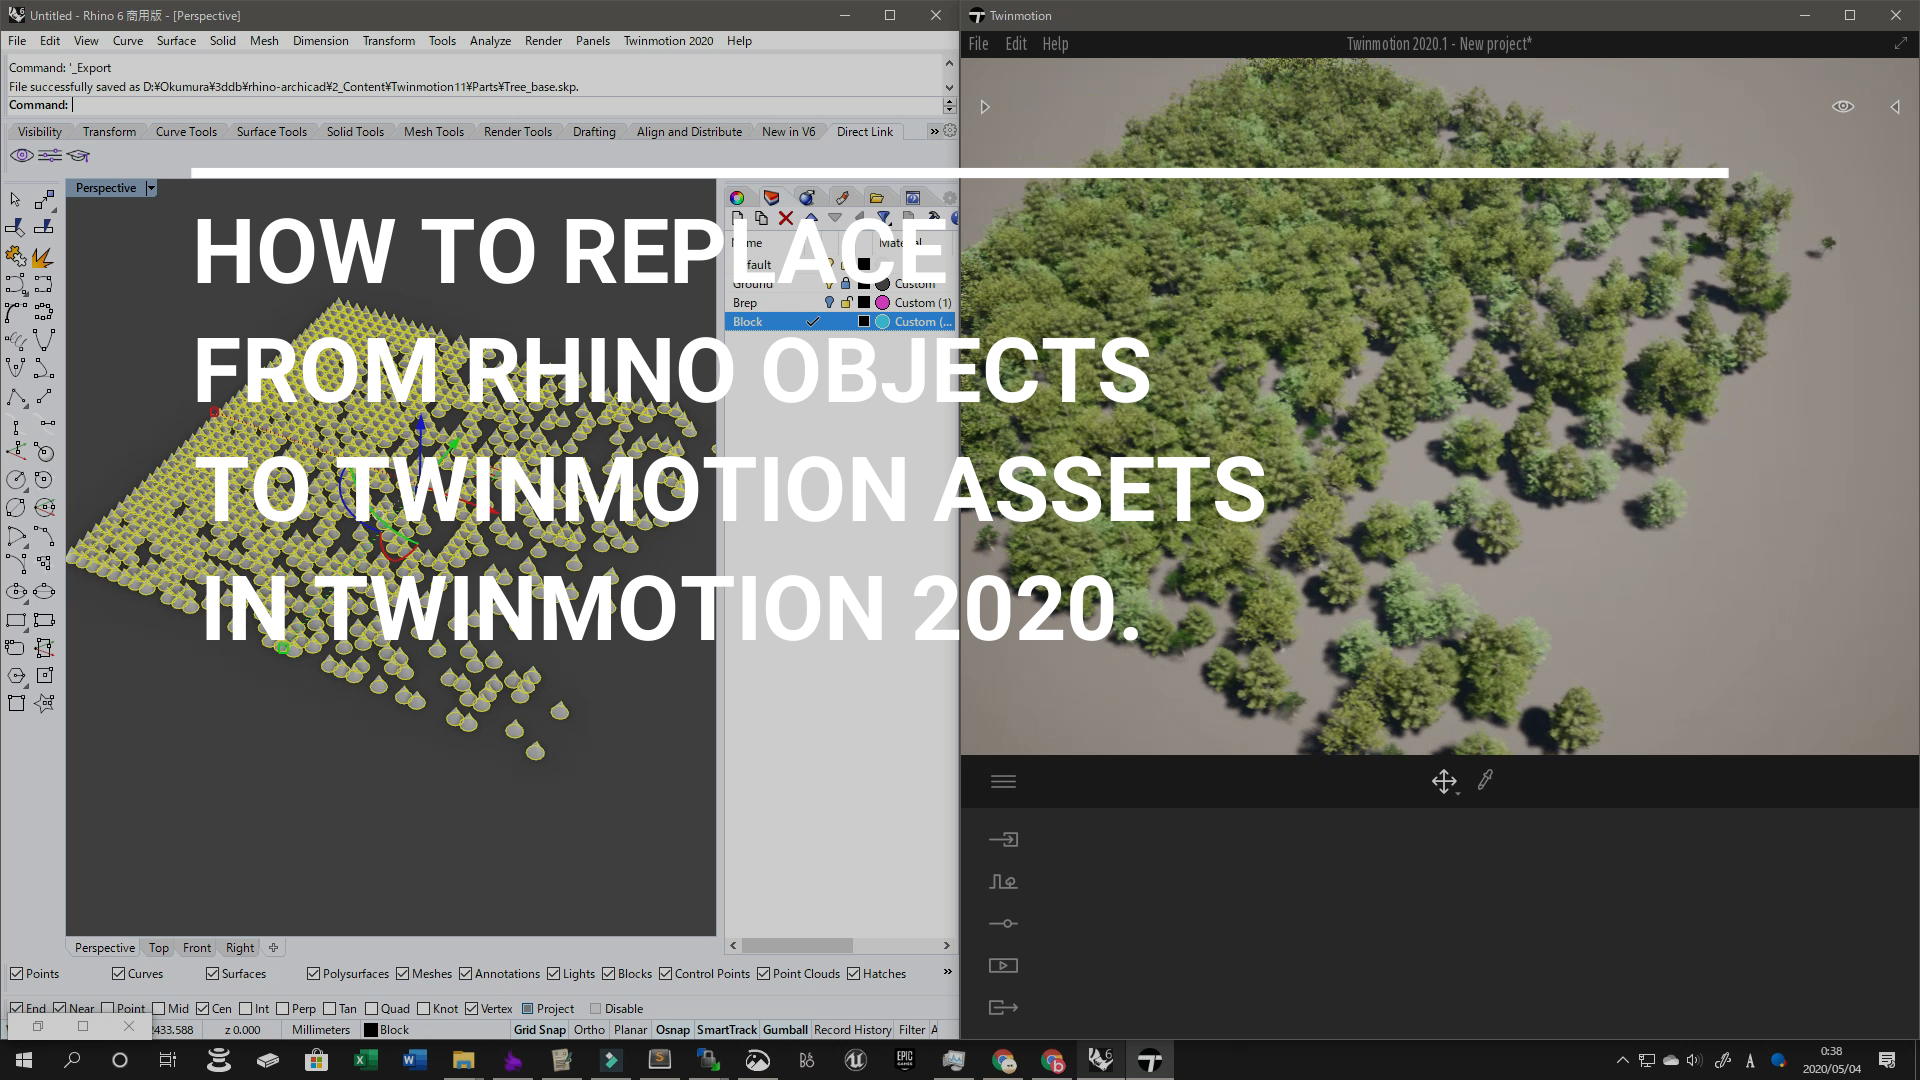 twinmotion direct link revit not working